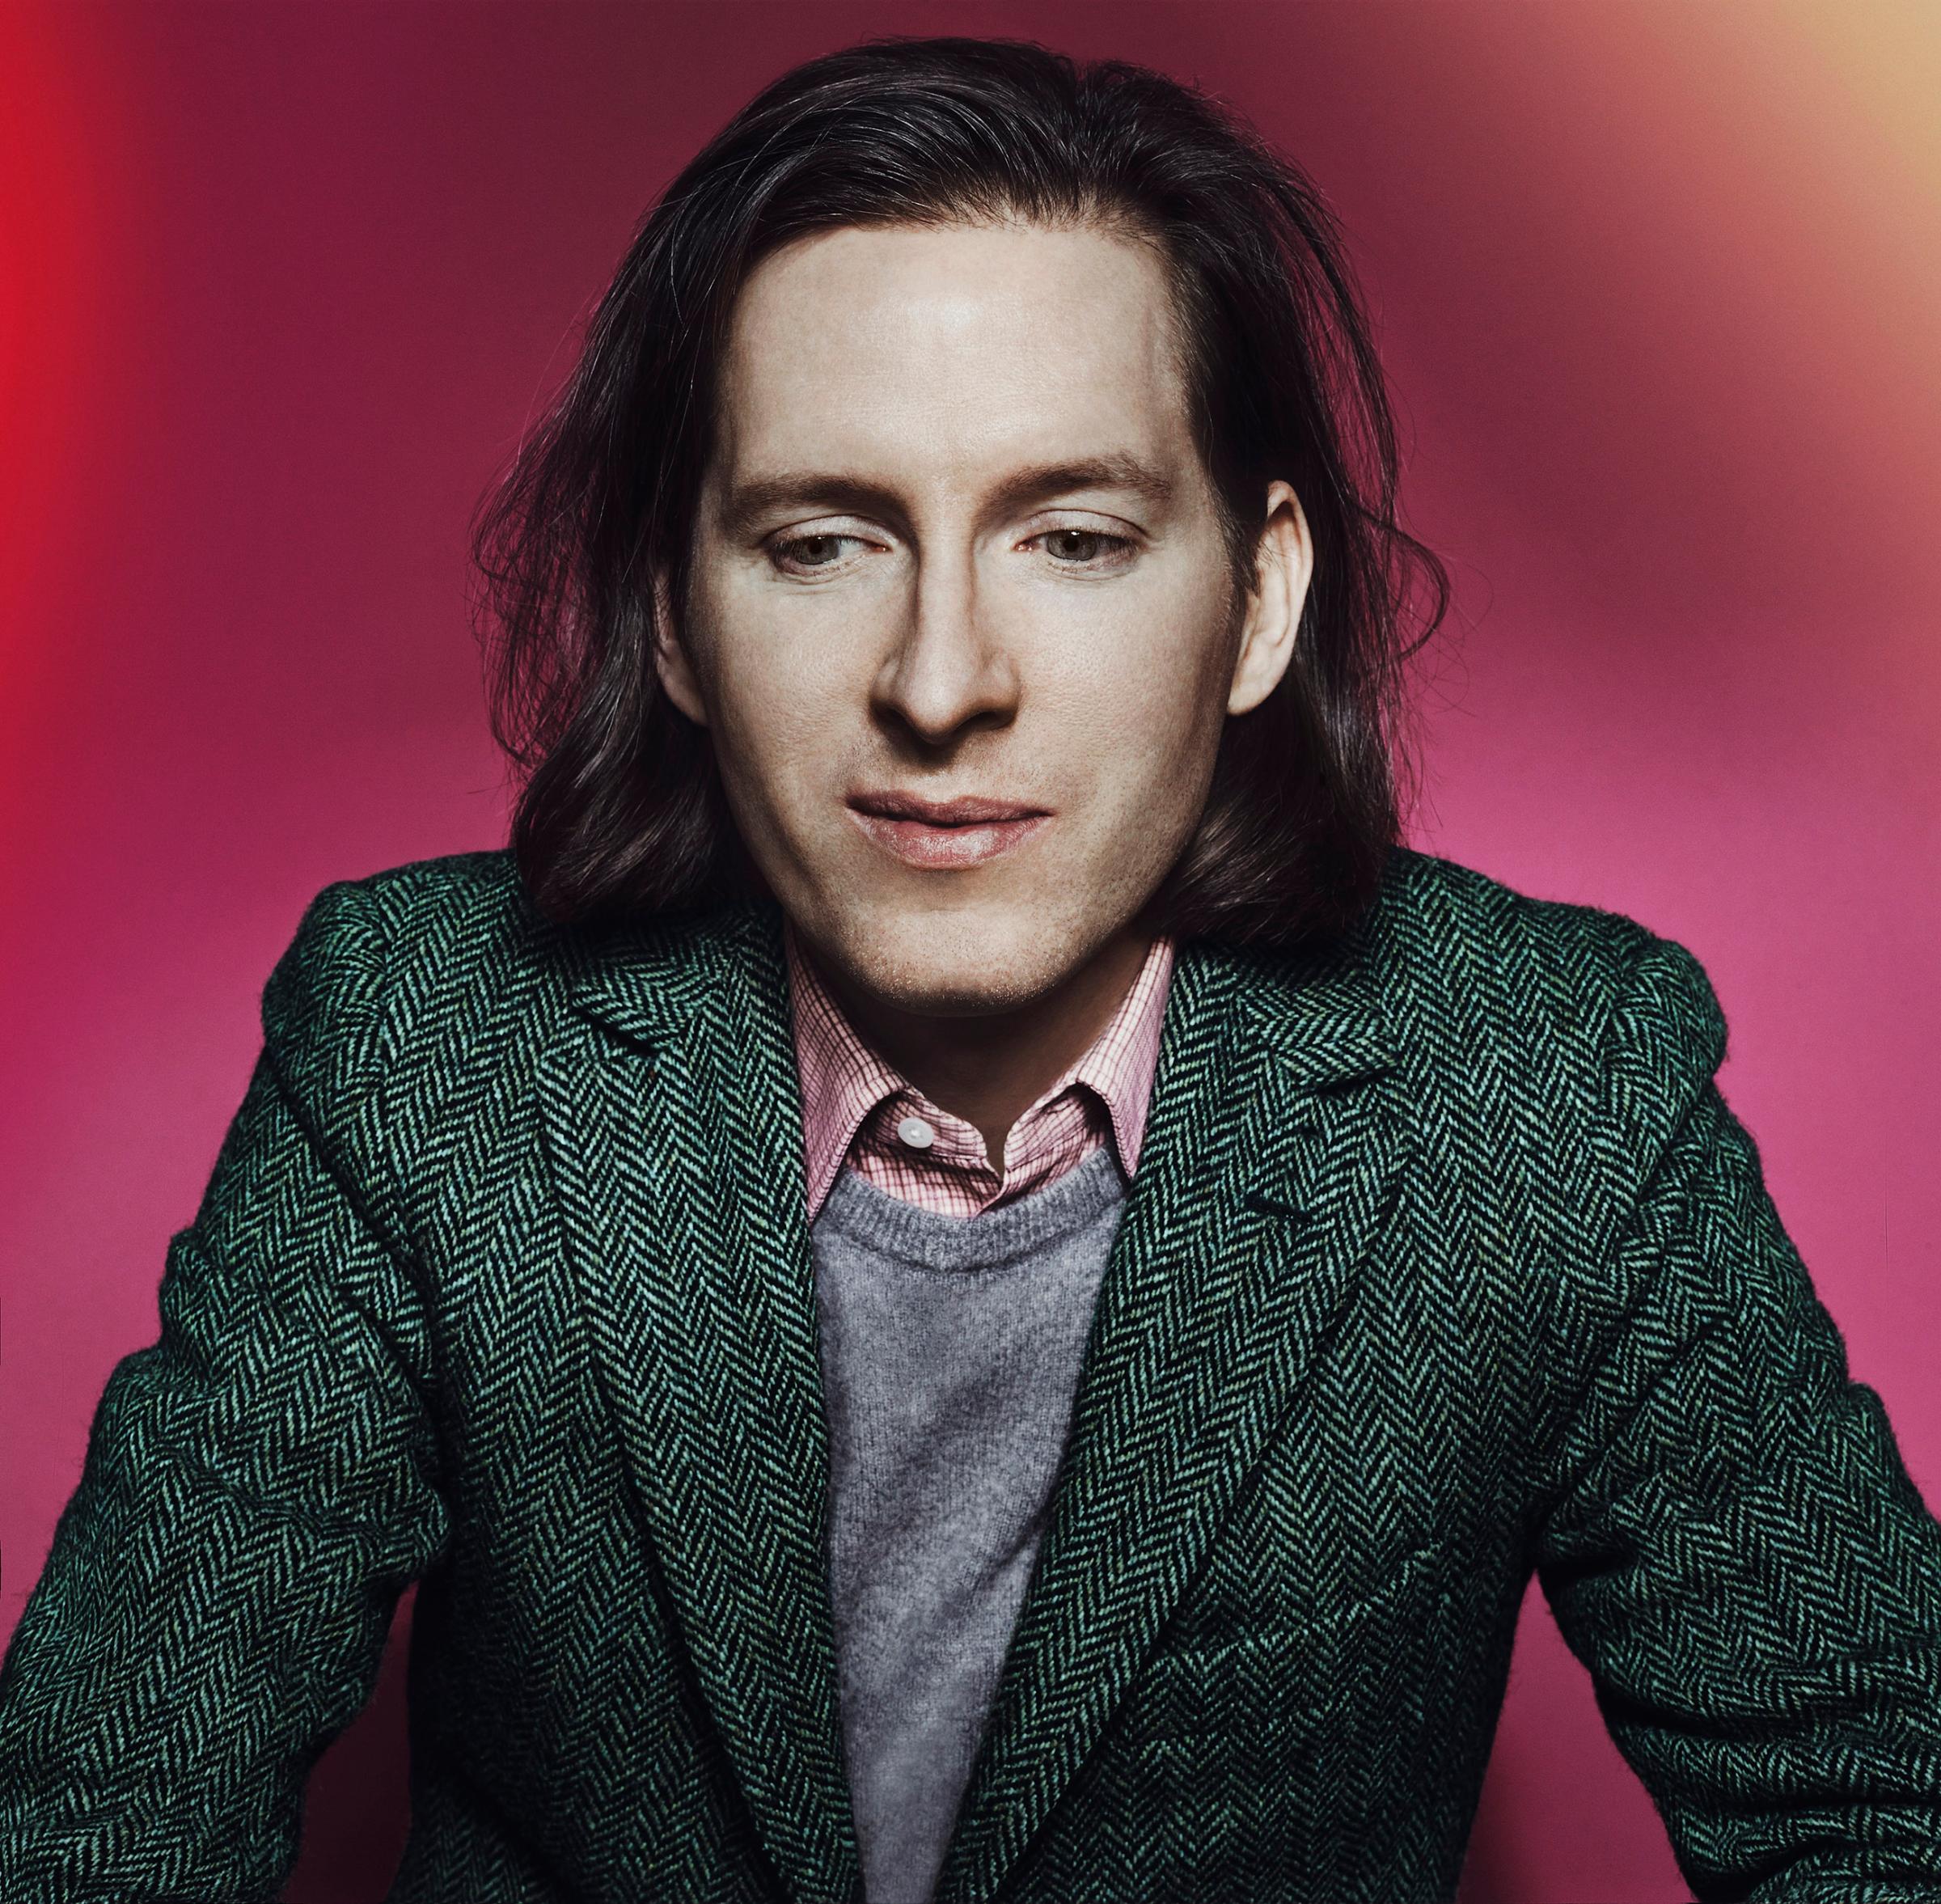 Portrait of Wes Anderson photographed at the Aldon Hotel Kempinski, Berlin, Germany, February 8, 2014. (Markus Jans  for TIME)